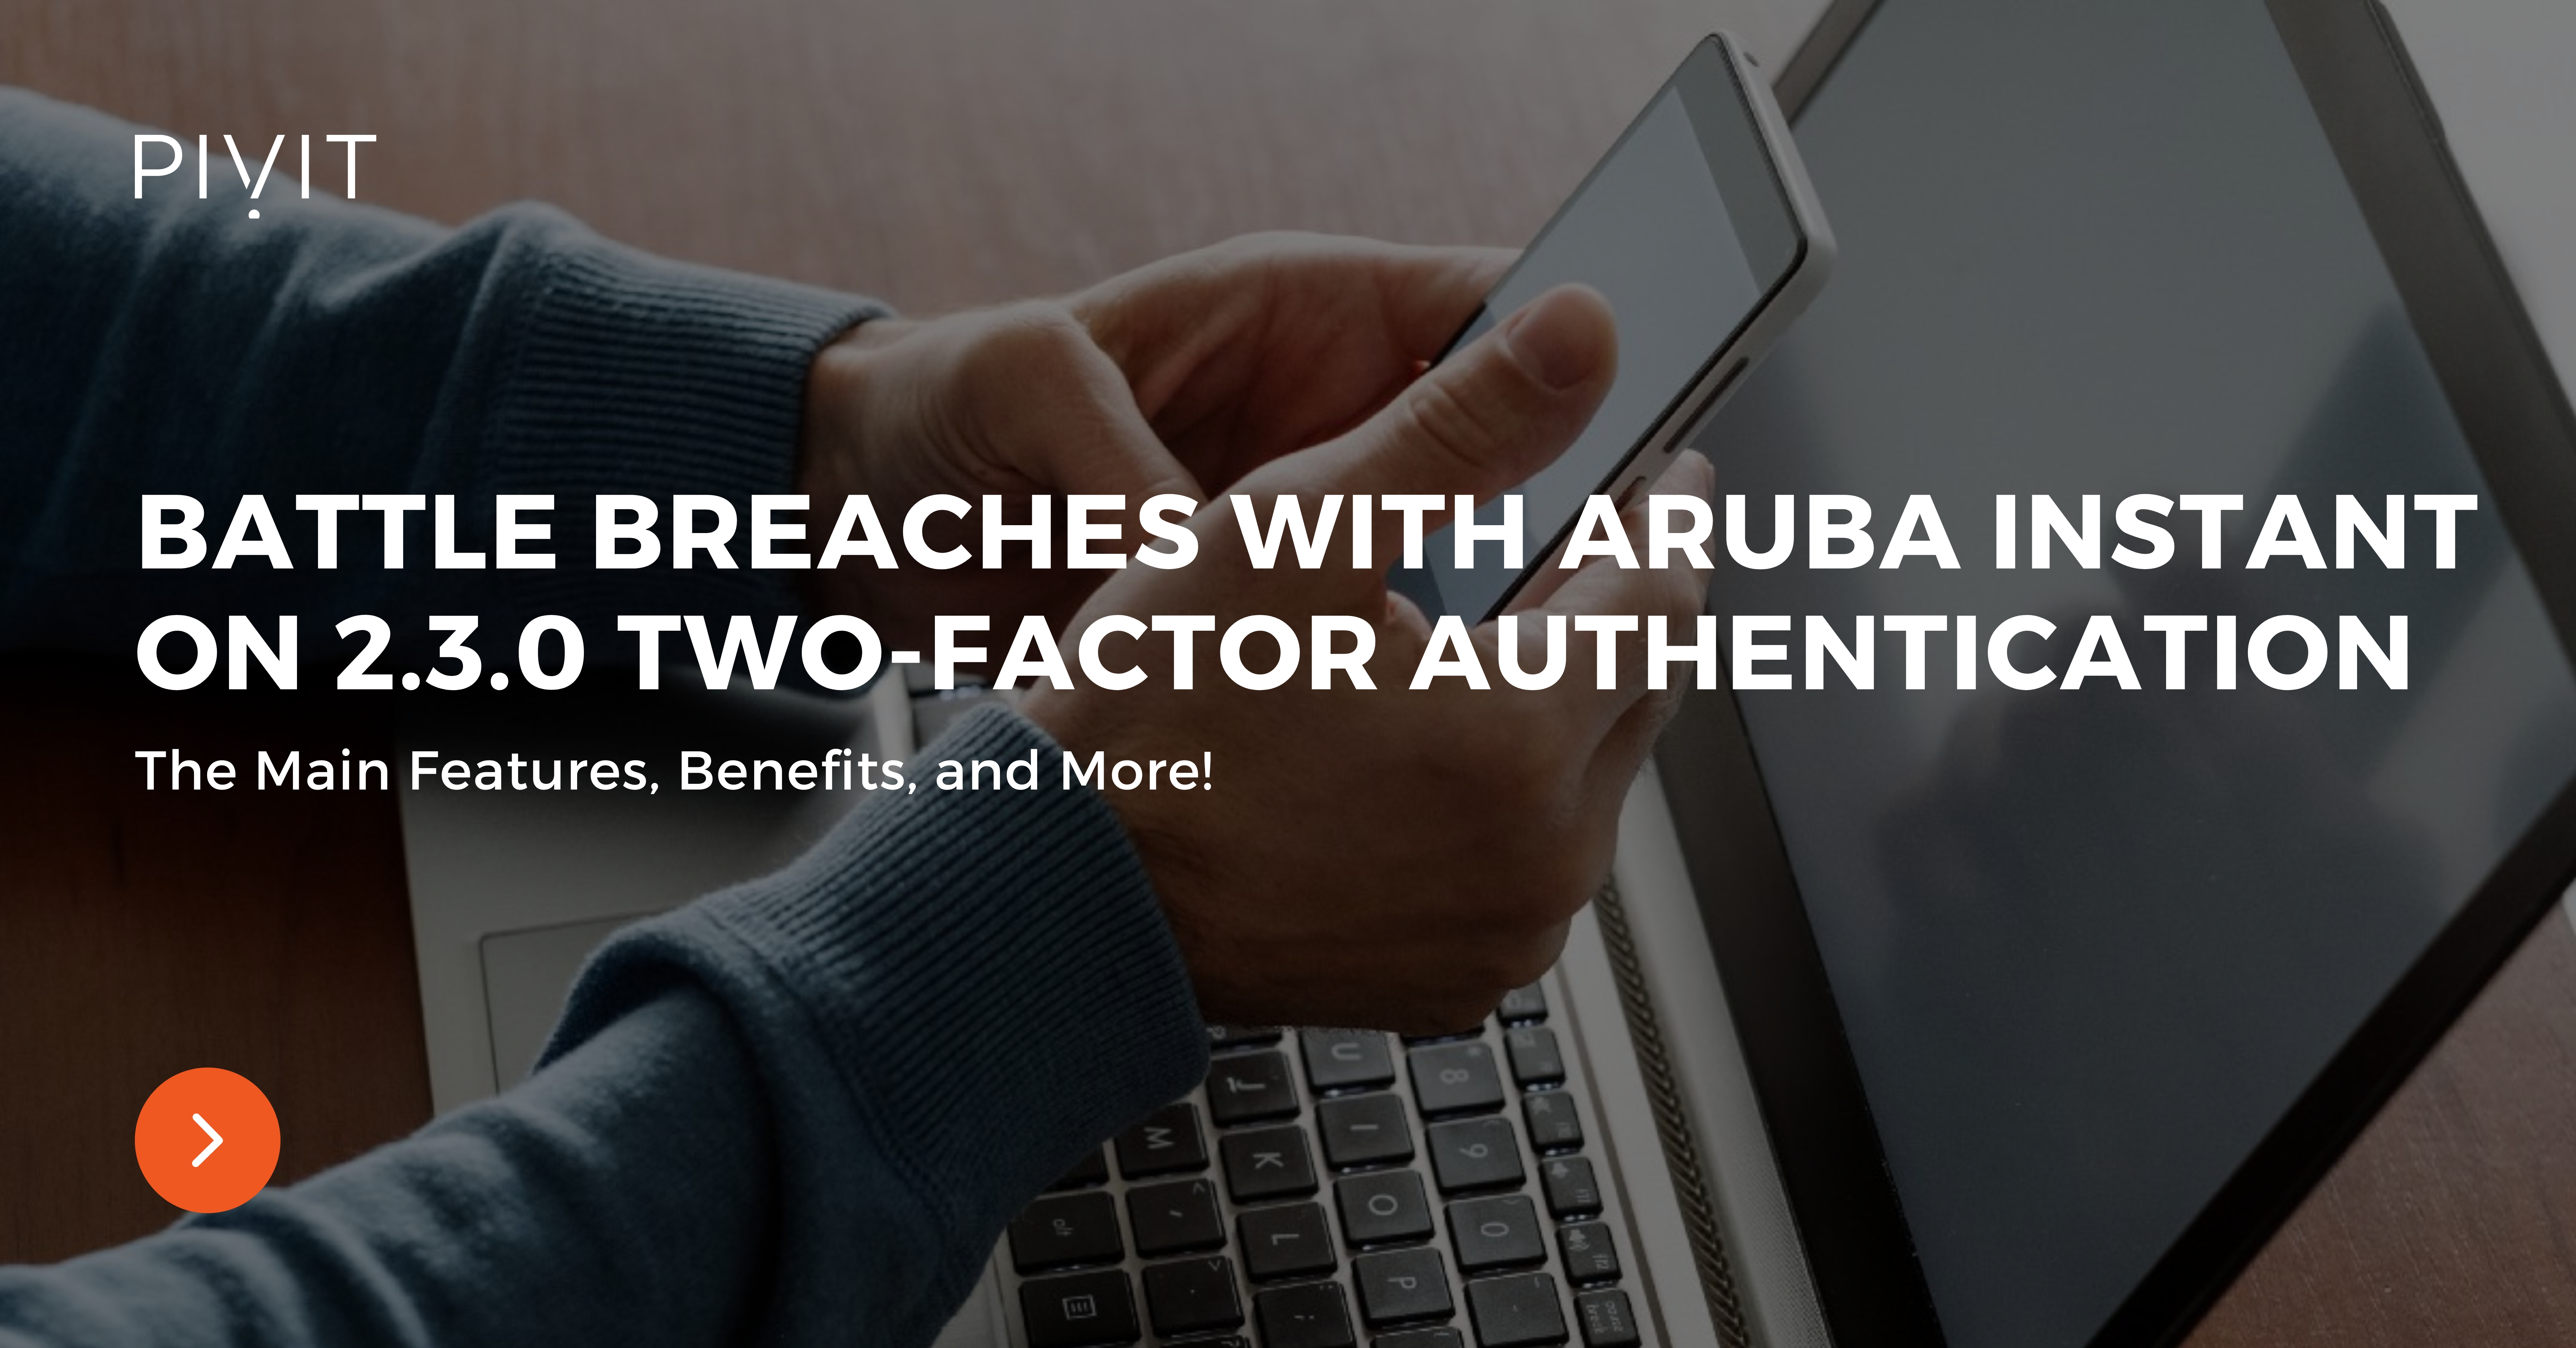 Battle Breaches With Aruba Instant On 2.3.0 Two-Factor Authentication - The Main Features, Benefits, and More!